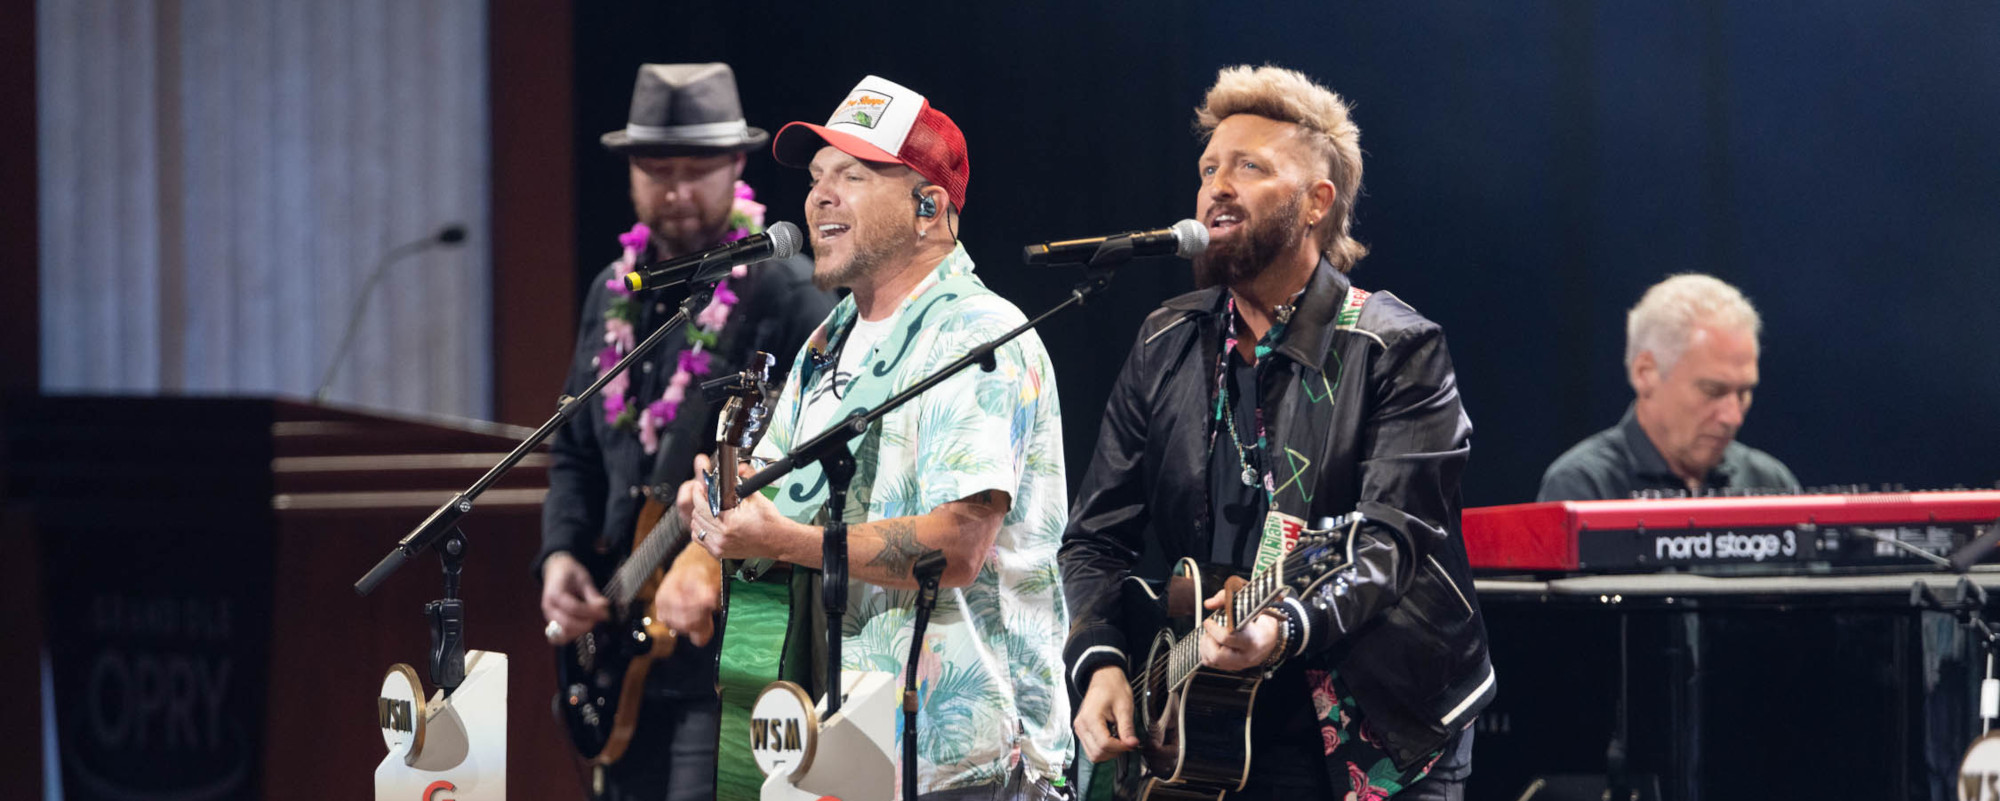 LOCASH Continues Writing Their Success Story with The Beach Boys as Mentors